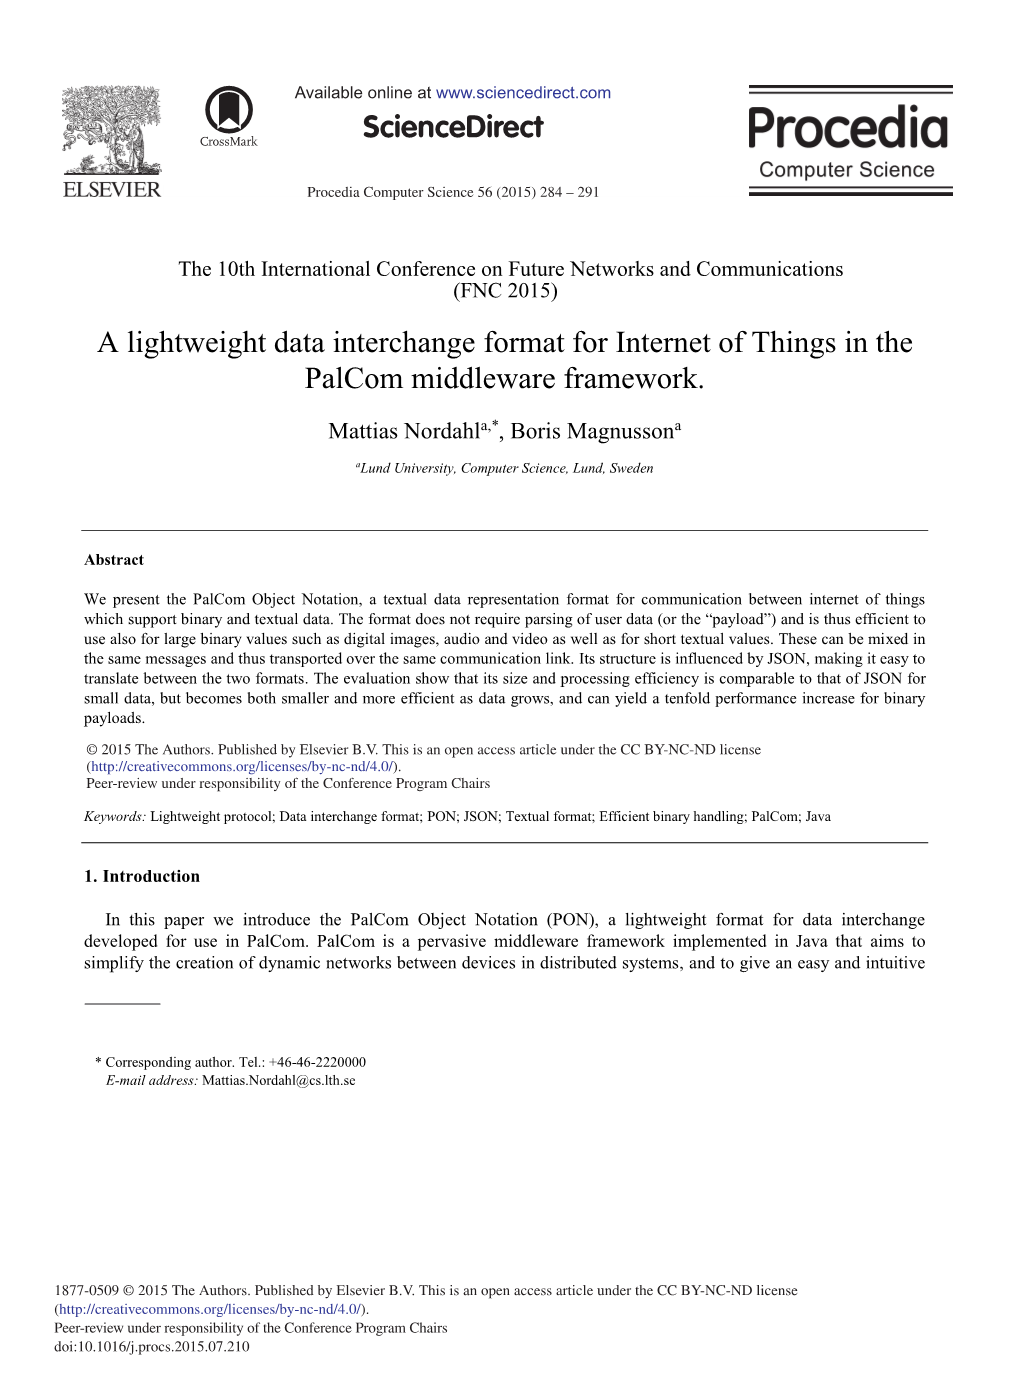 A Lightweight Data Interchange Format for Internet of Things in the Palcom Middleware Framework